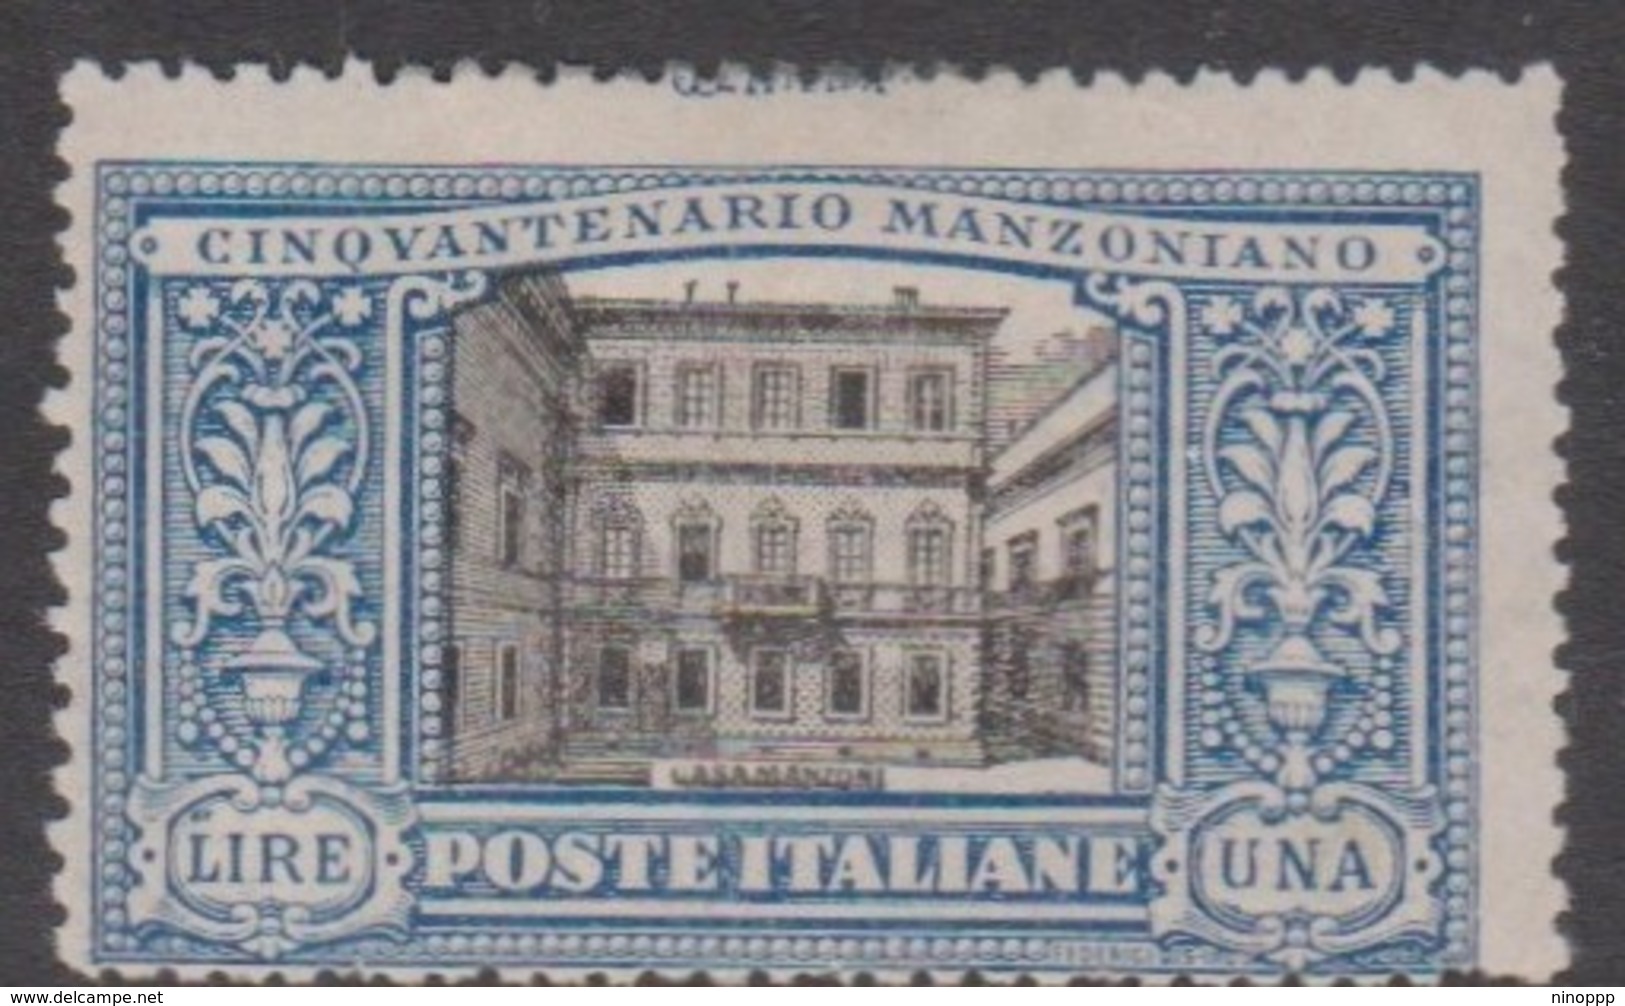 Italy S 155 1923 50th Anniversary Death Of Manzoni, 1 Lira Blue And Black, Mint Hinged - Mint/hinged